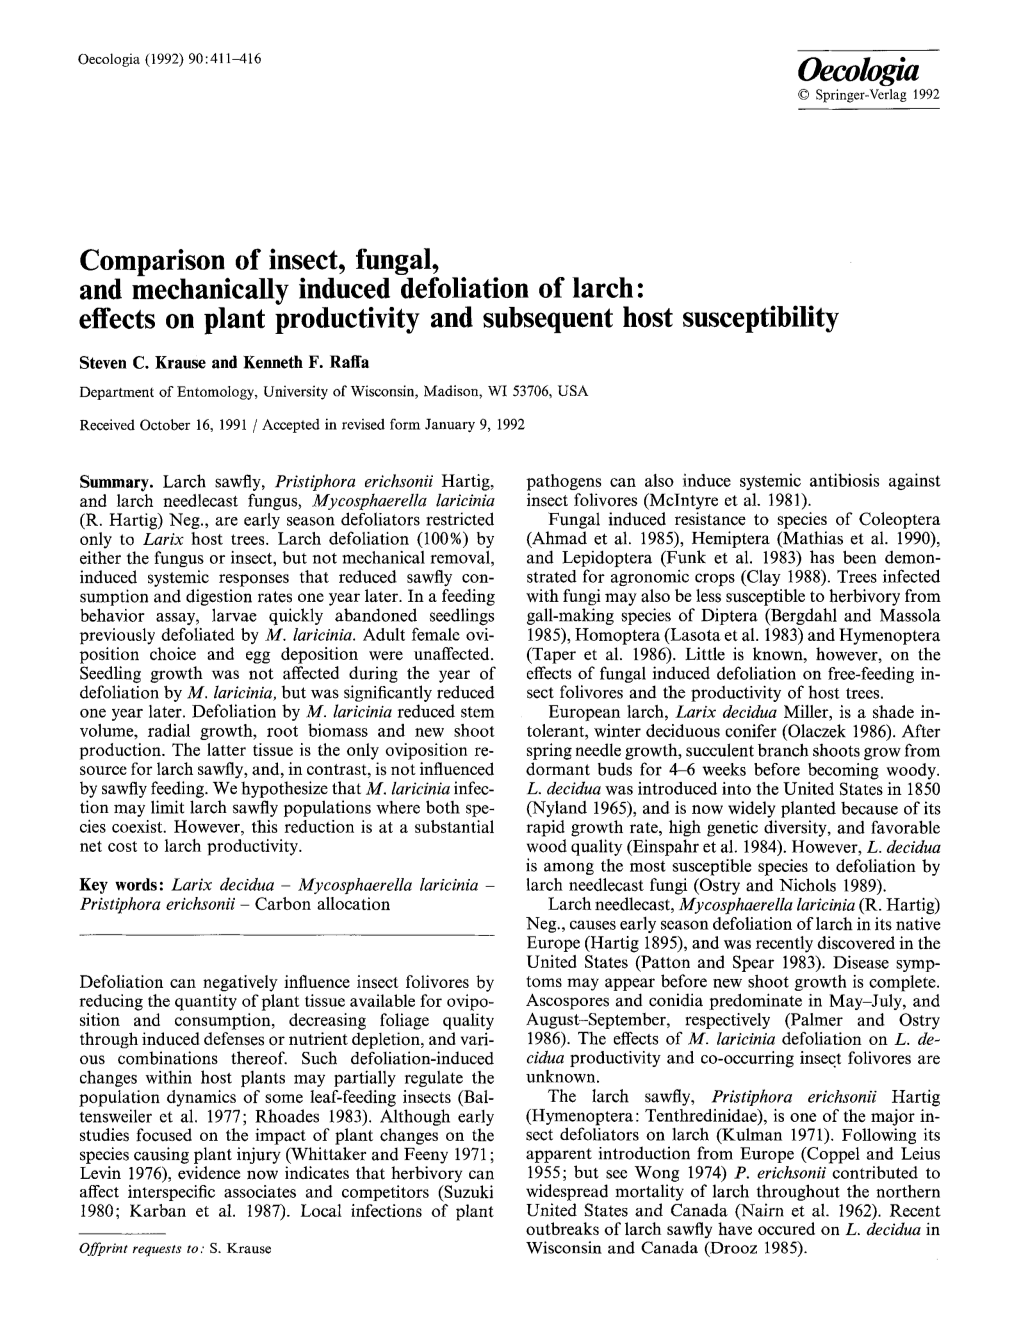 Comparison of Insect, Fungal, and Mechanically Induced Defoliation of Larch: Effects on Plant Productivity and Subsequent Host Susceptibility